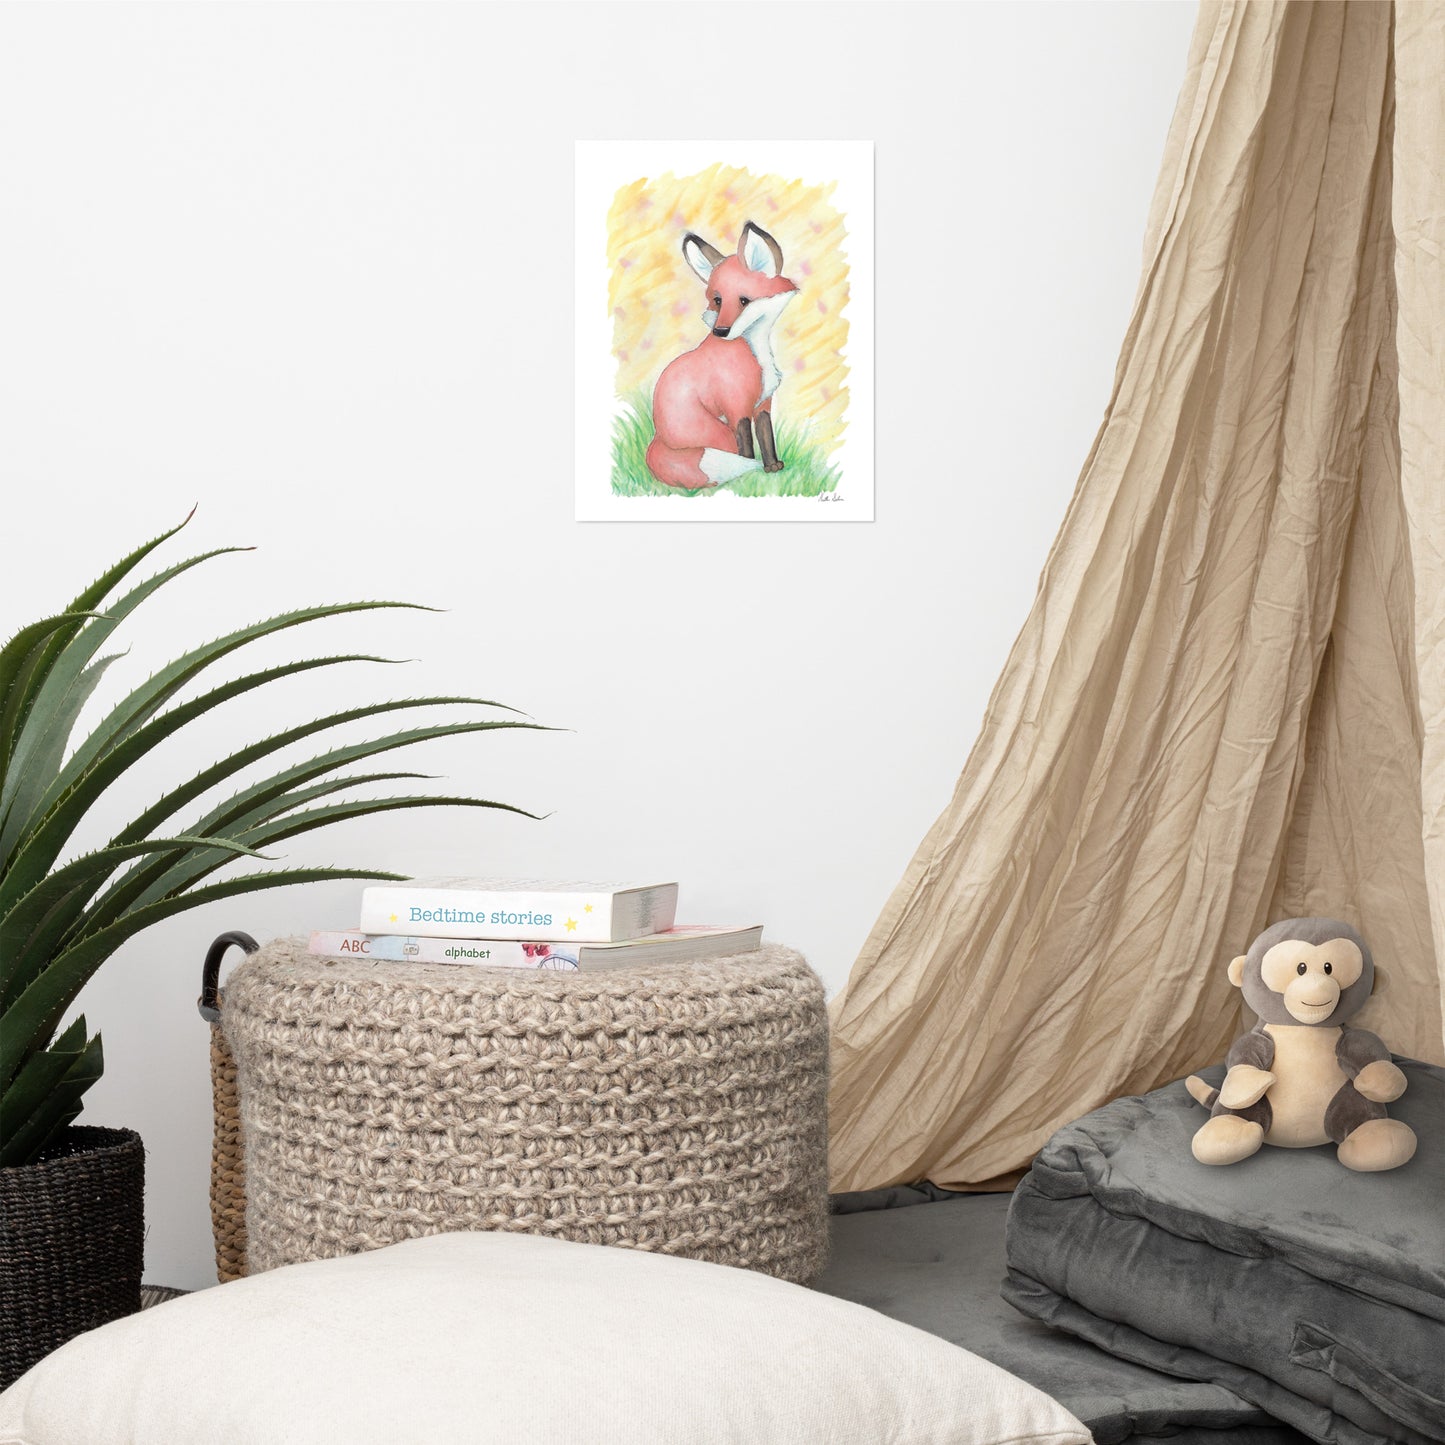 11x14 matte paper art print. Giclée quality printing. Design is a watercolor painting of a fox in the grass against a yellow background. Shown on the wall by tan curtain and monkey plush.